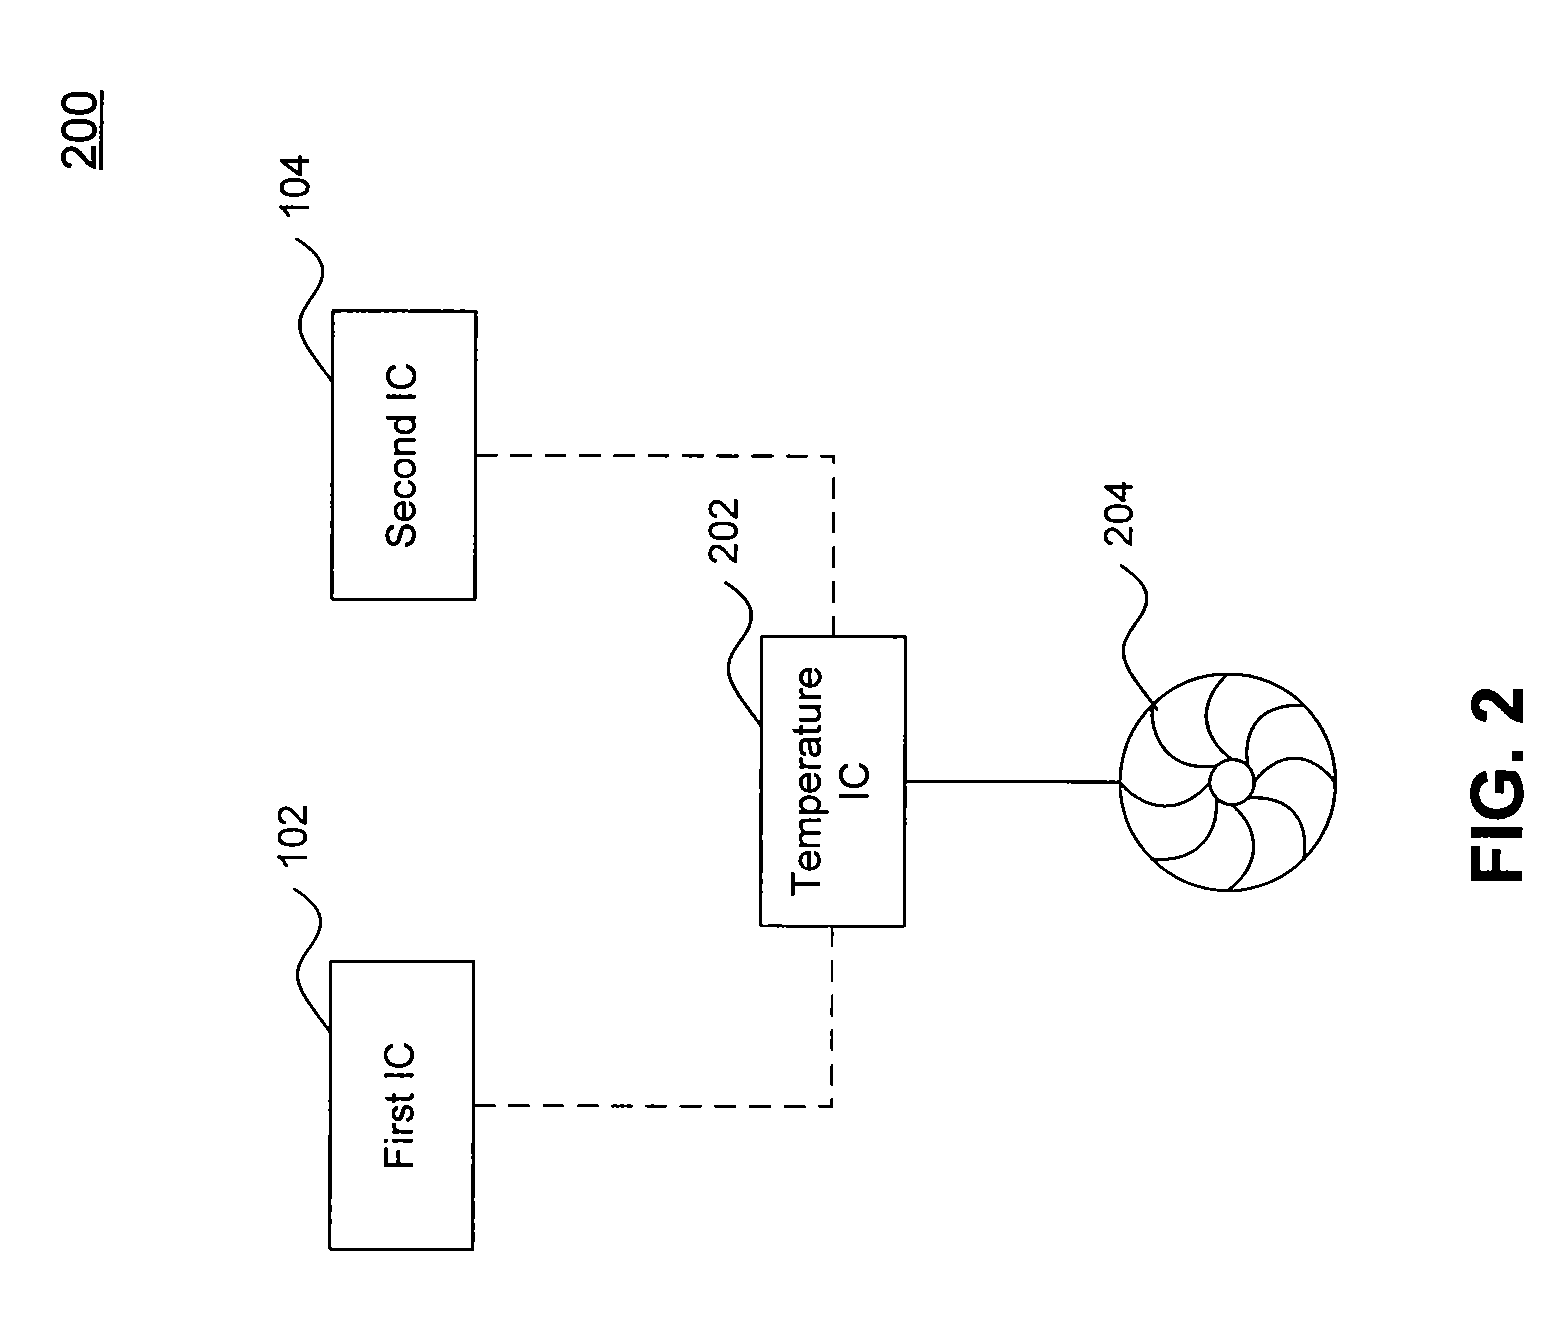 Apparatus and method for providing cooling to multiple components